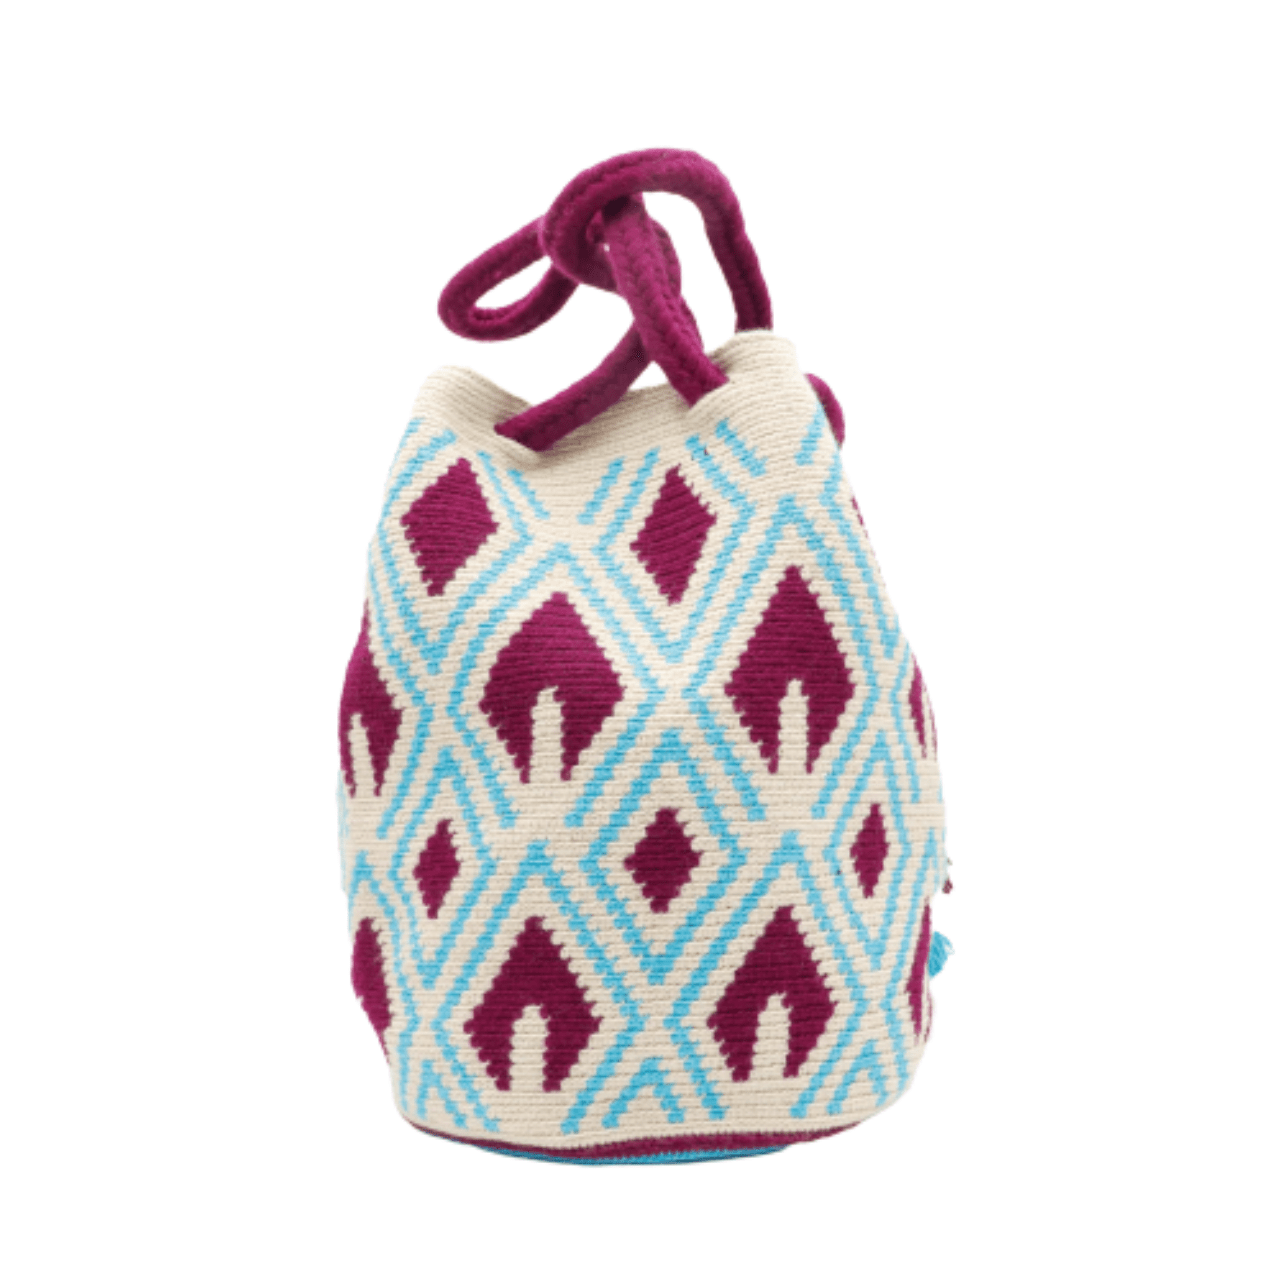  Demi Large Tote Bag for Women in Aqua, Beige, and Magenta with Intricate Design, Braided Handles, Tassels, and Pom Poms.